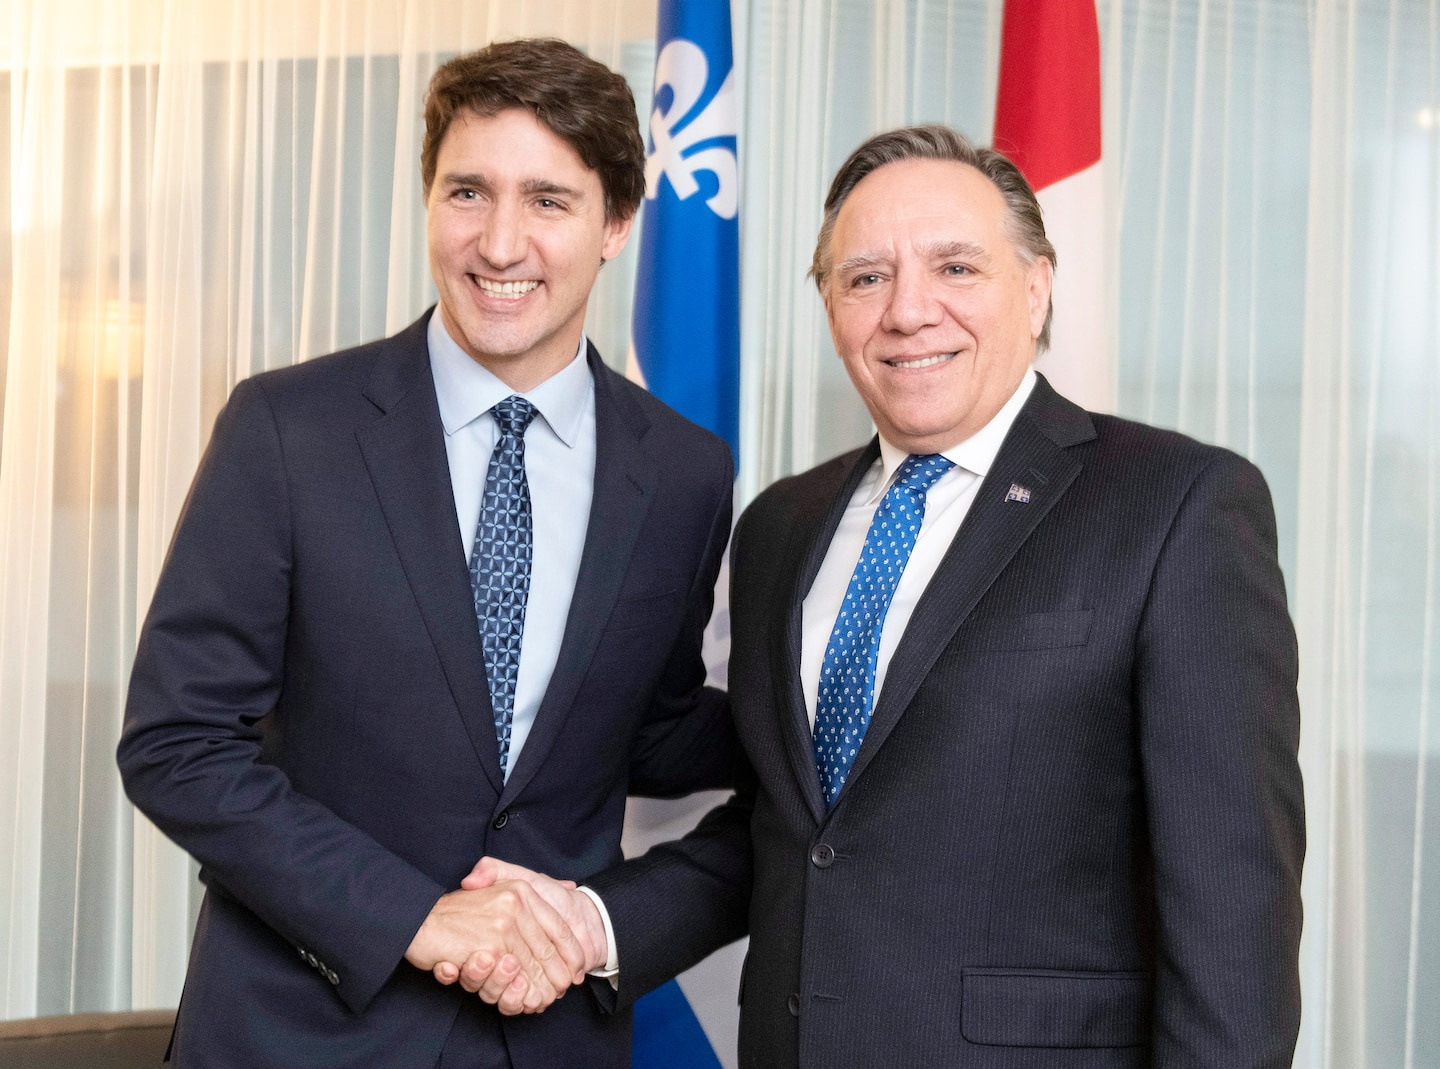 Trudeau and Legault as Good Cop, Bad Cop